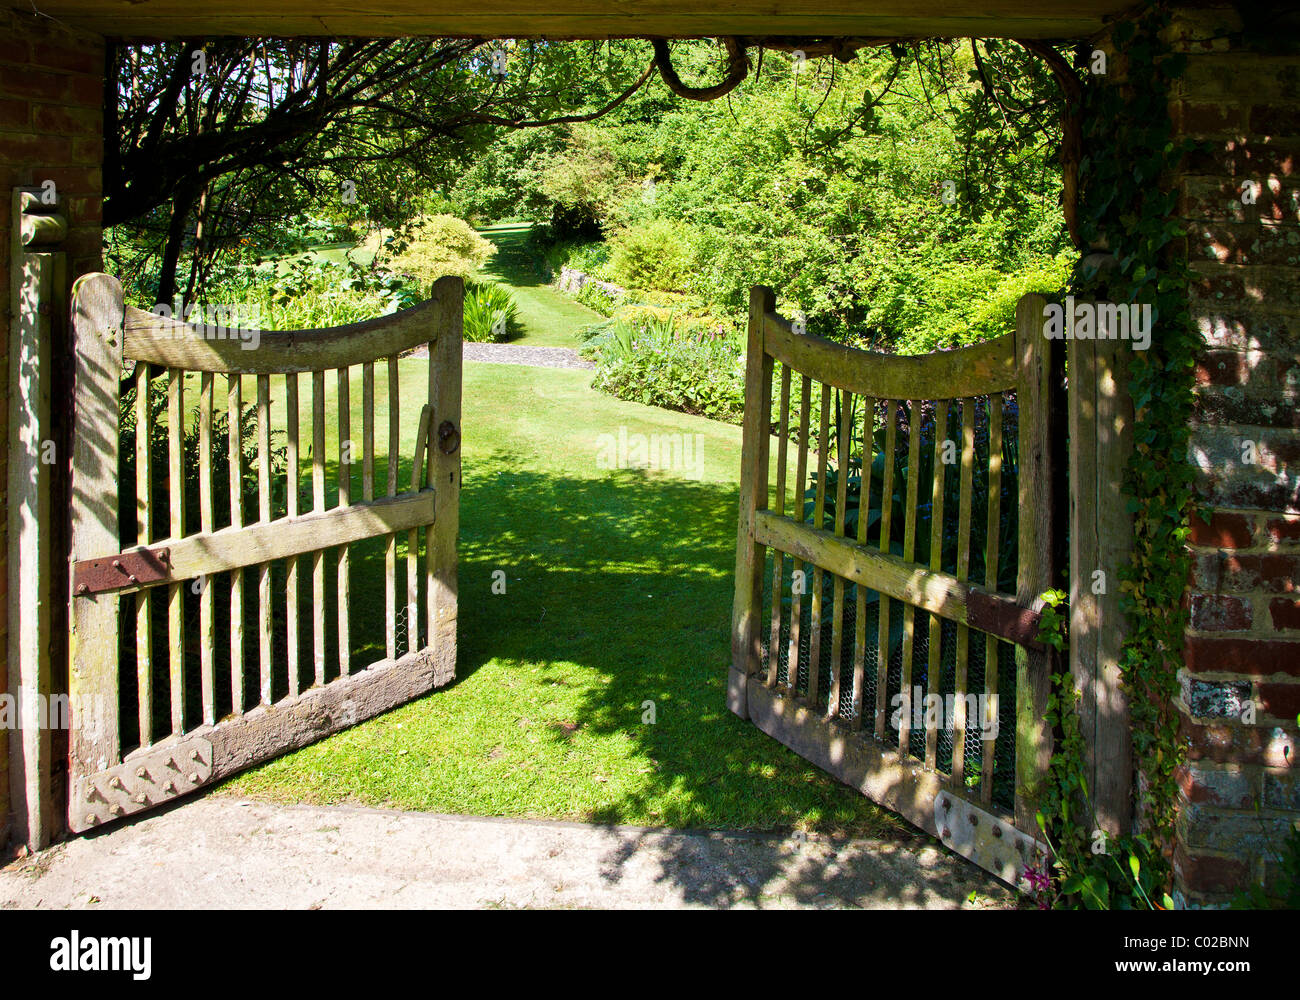 An open wooden garden gate in an English country garden showing a view to the wider garden beyond. Stock Photo